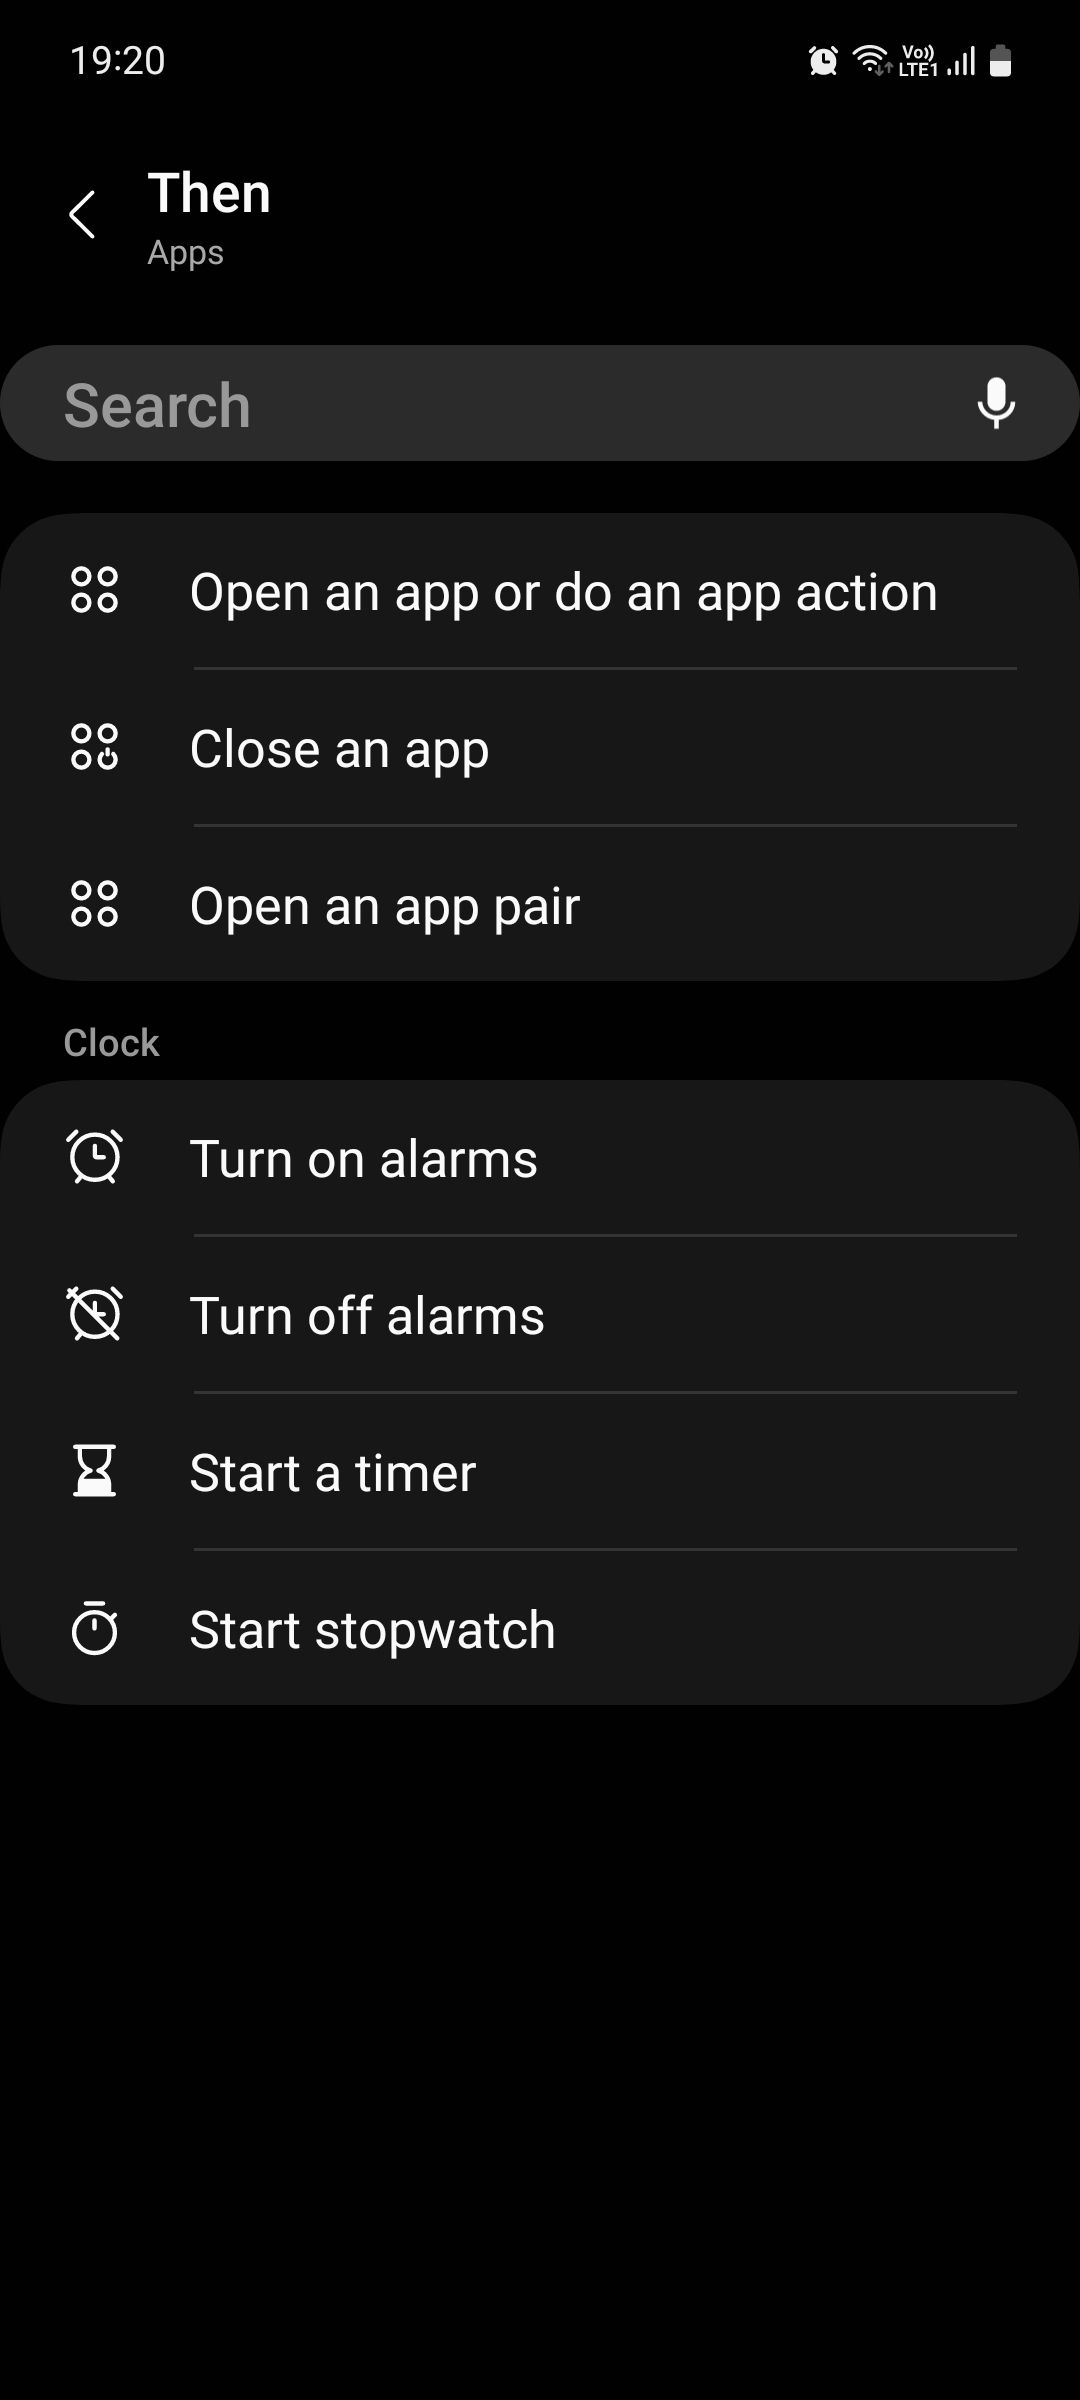 Samsung Modes and Routines Then commands under Apps section